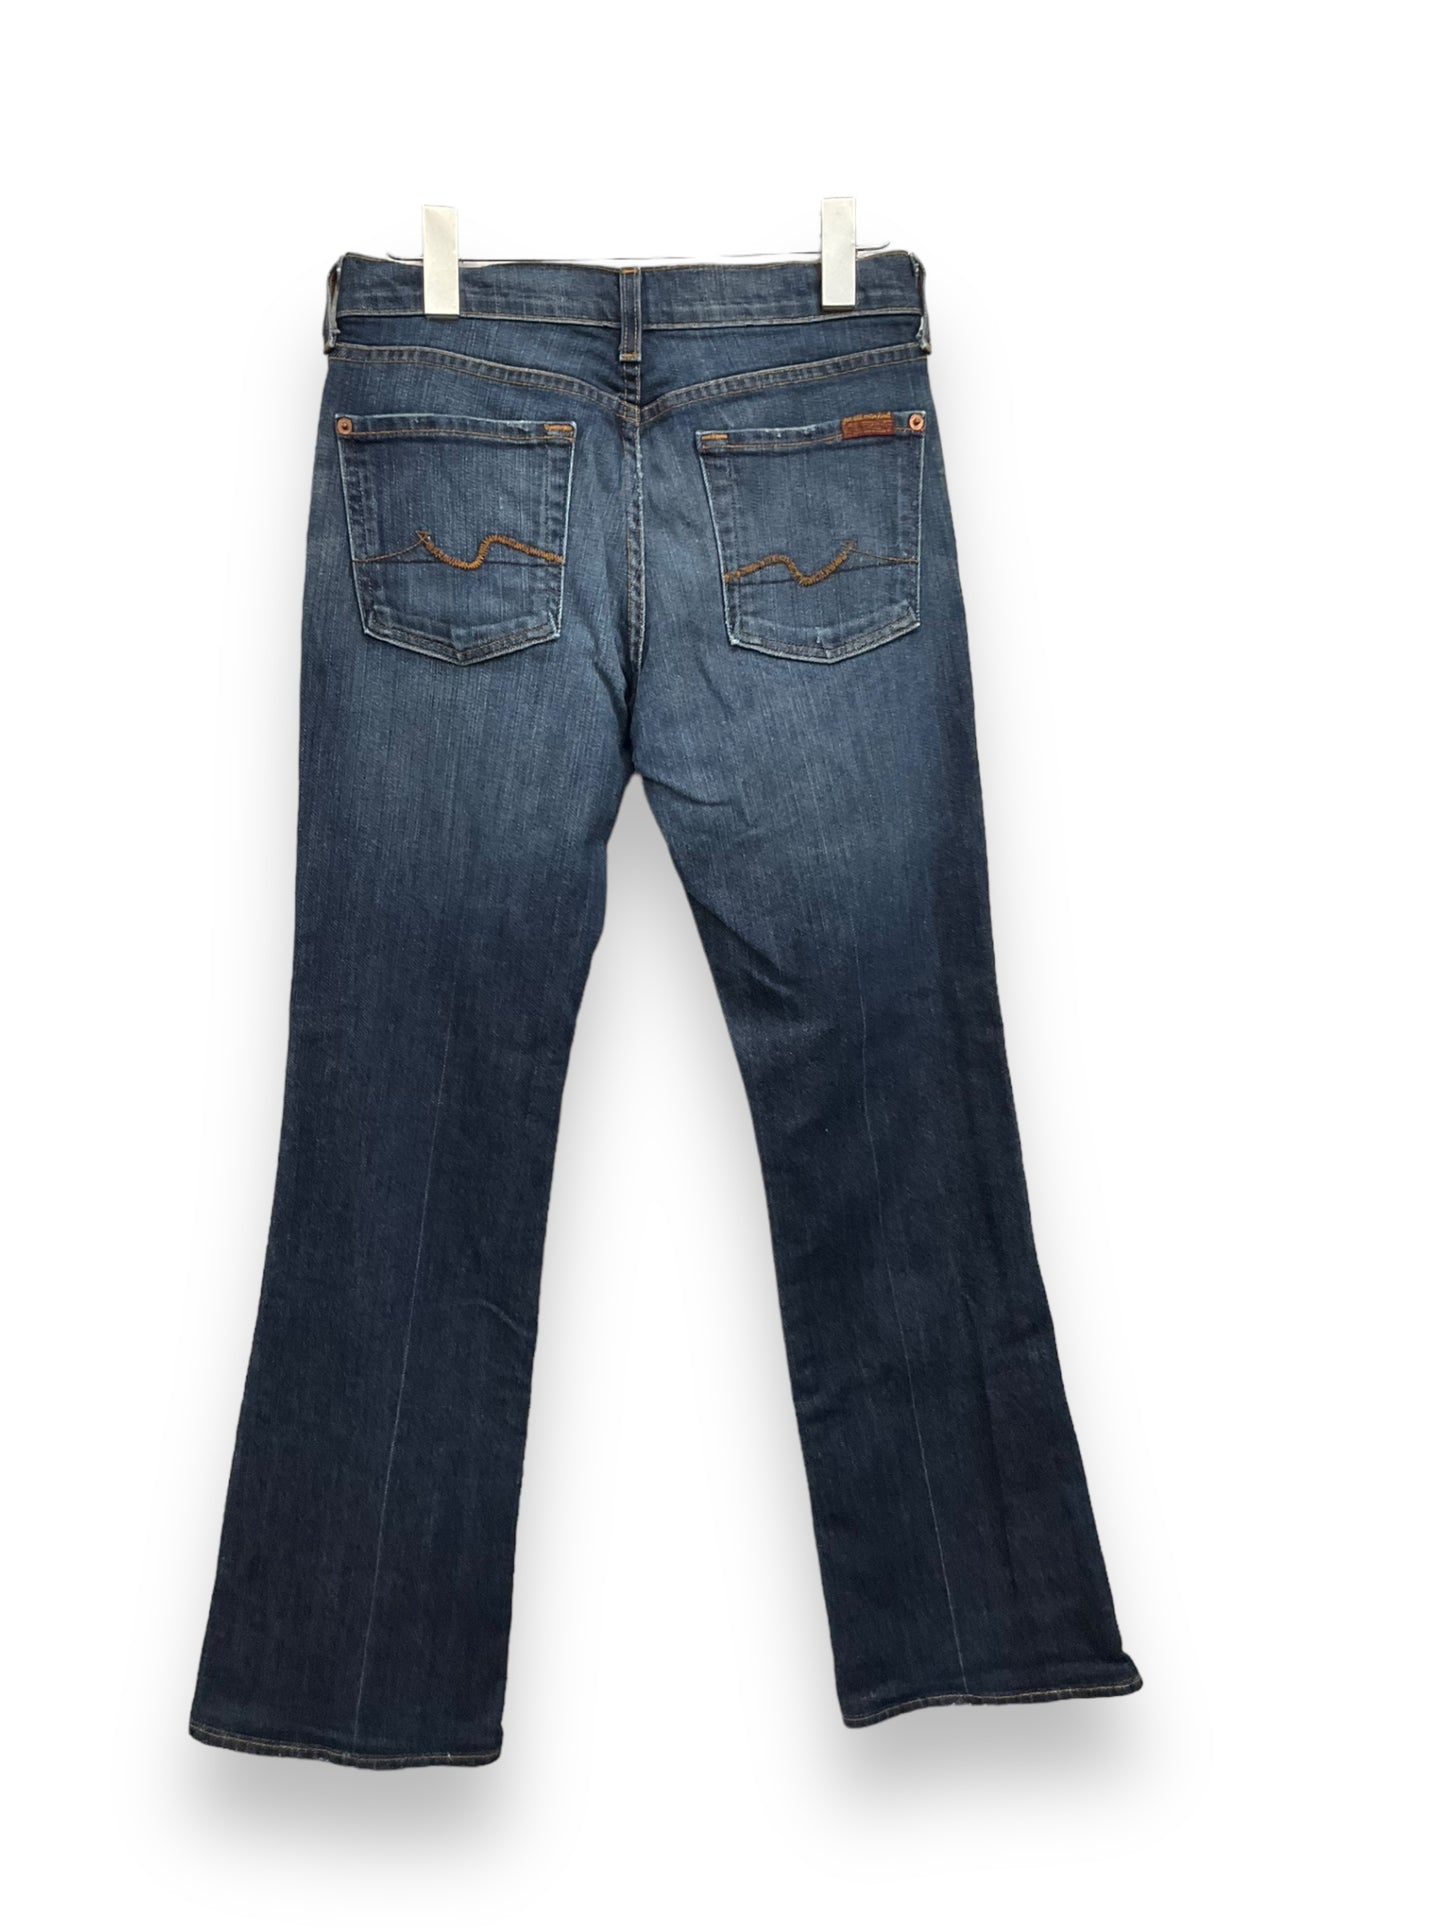 Jeans Boot Cut By 7 For All Mankind  Size: 4